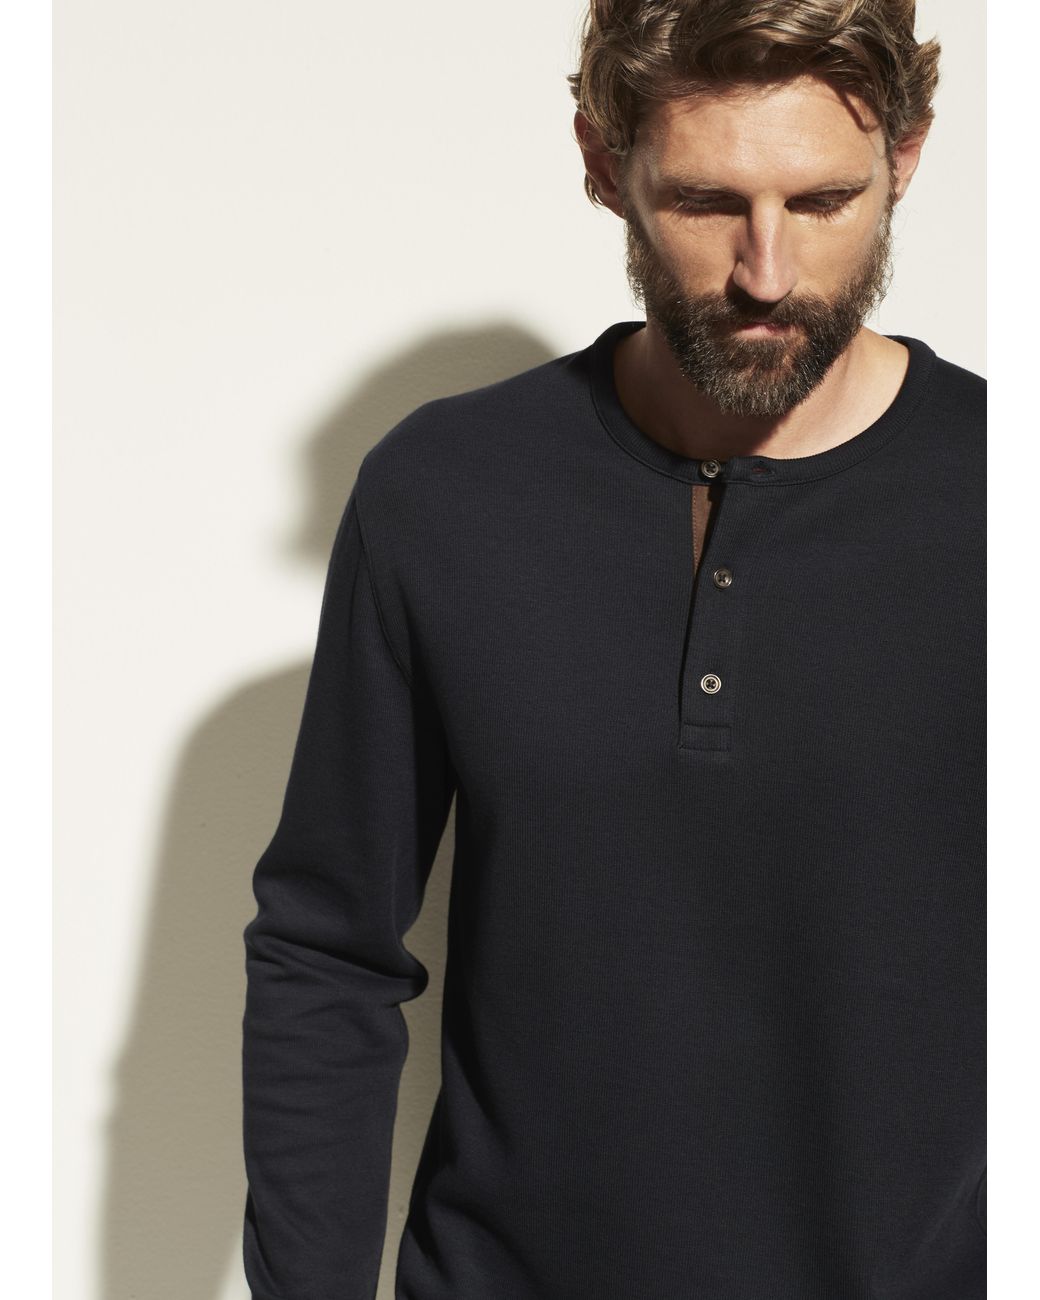 Vince Cotton Long Sleeve Henley in Navy (Blue) for Men - Lyst